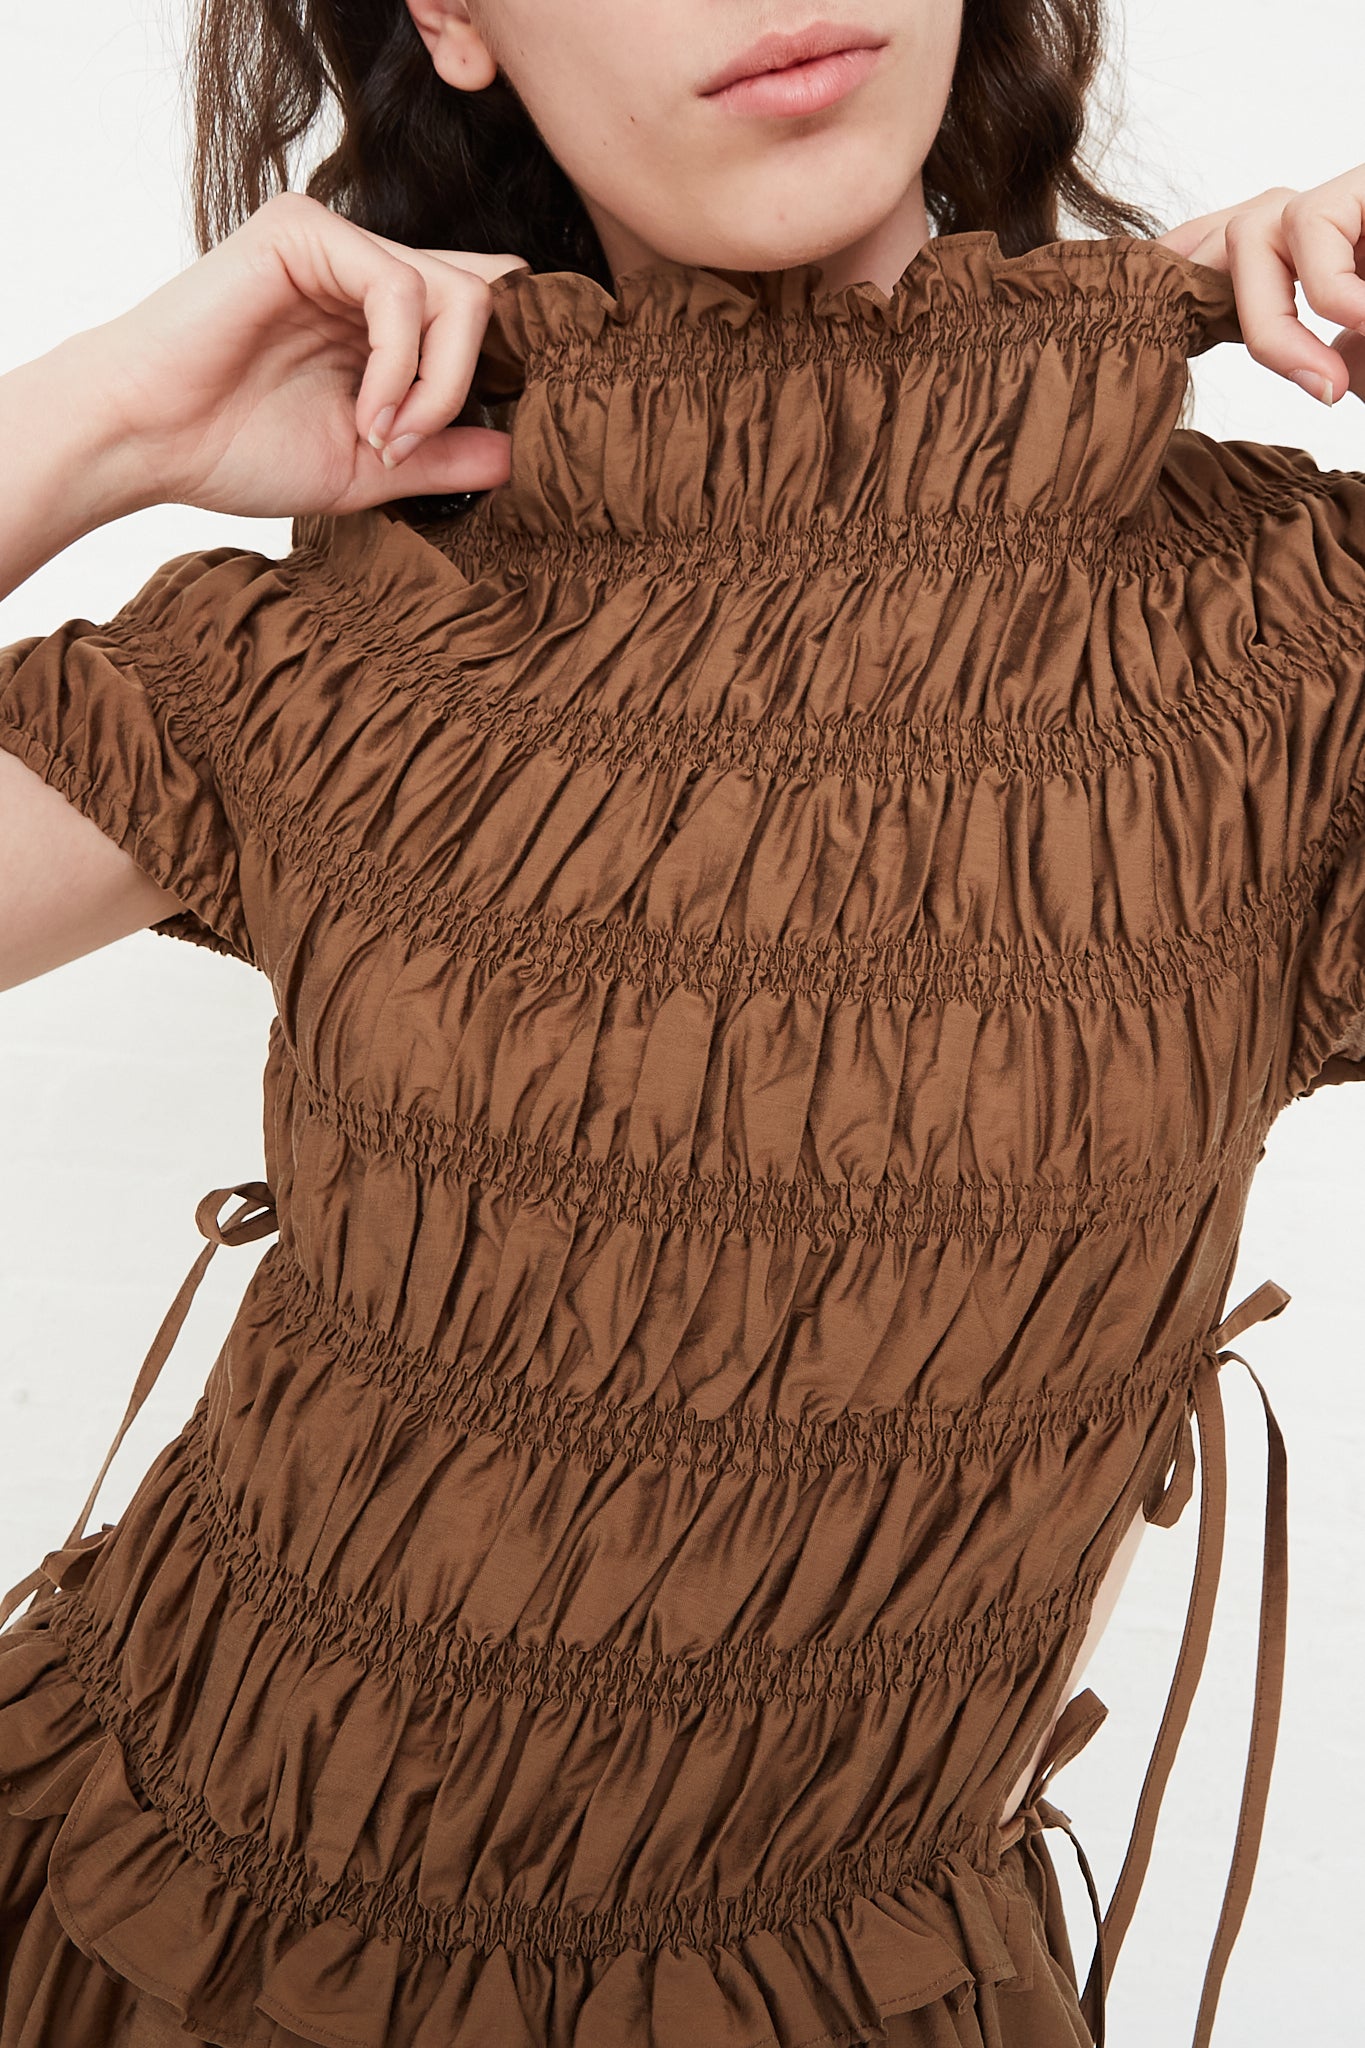 Cordera Sculpted Dress in Tigers Eye bodice smocking detail